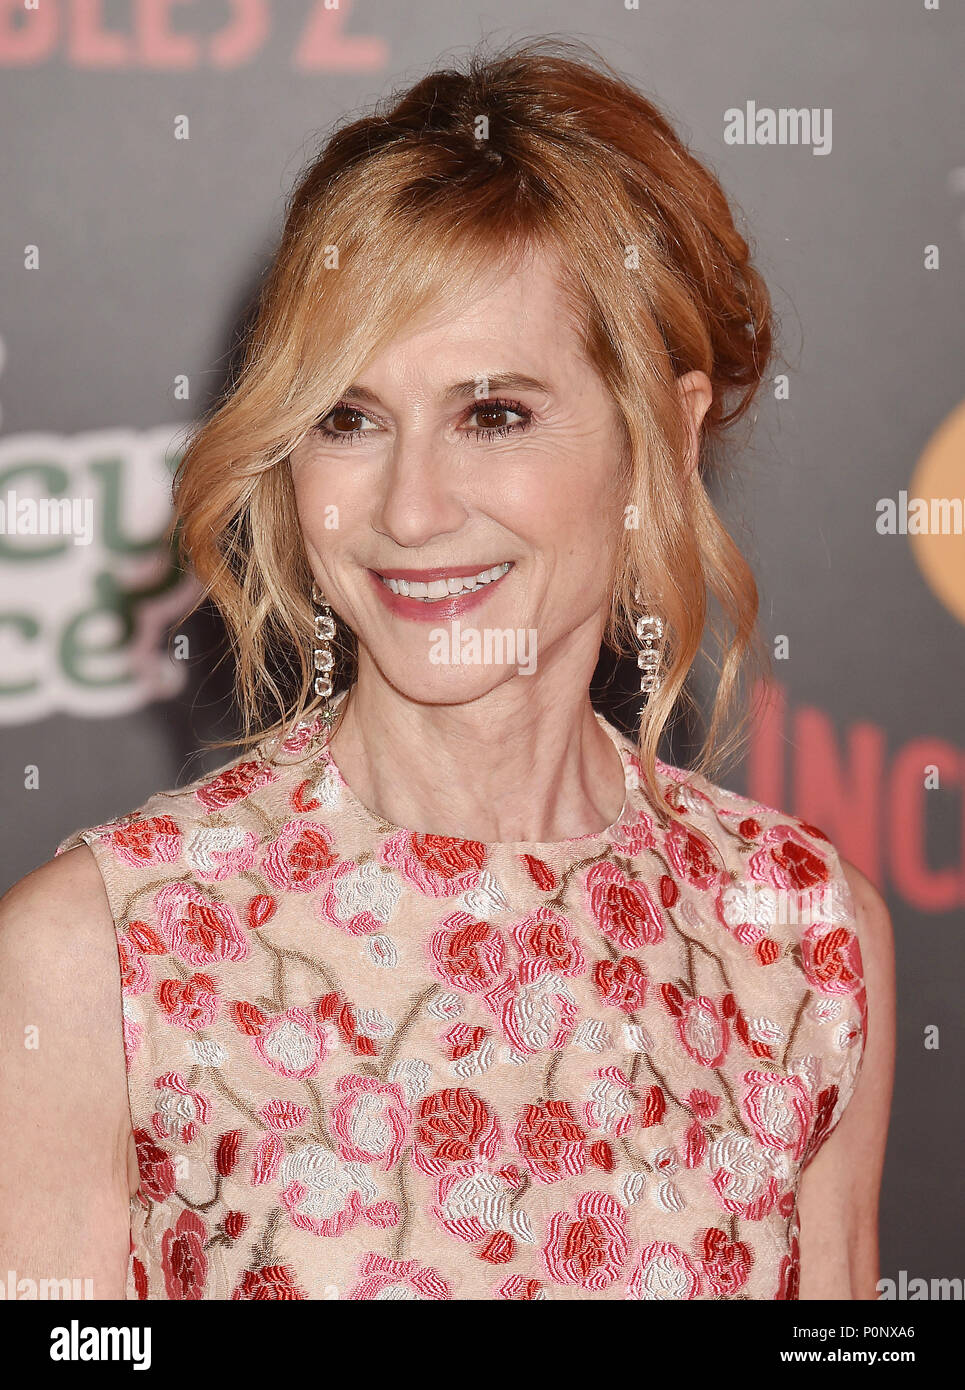 HOLLYWOOD, CA - JUNE 05: Holly Hunter attends the premiere of Disney and Pixar's 'Incredibles 2' at the El Capitan Theatre on June 5, 2018 in Los Angeles, California. Stock Photo